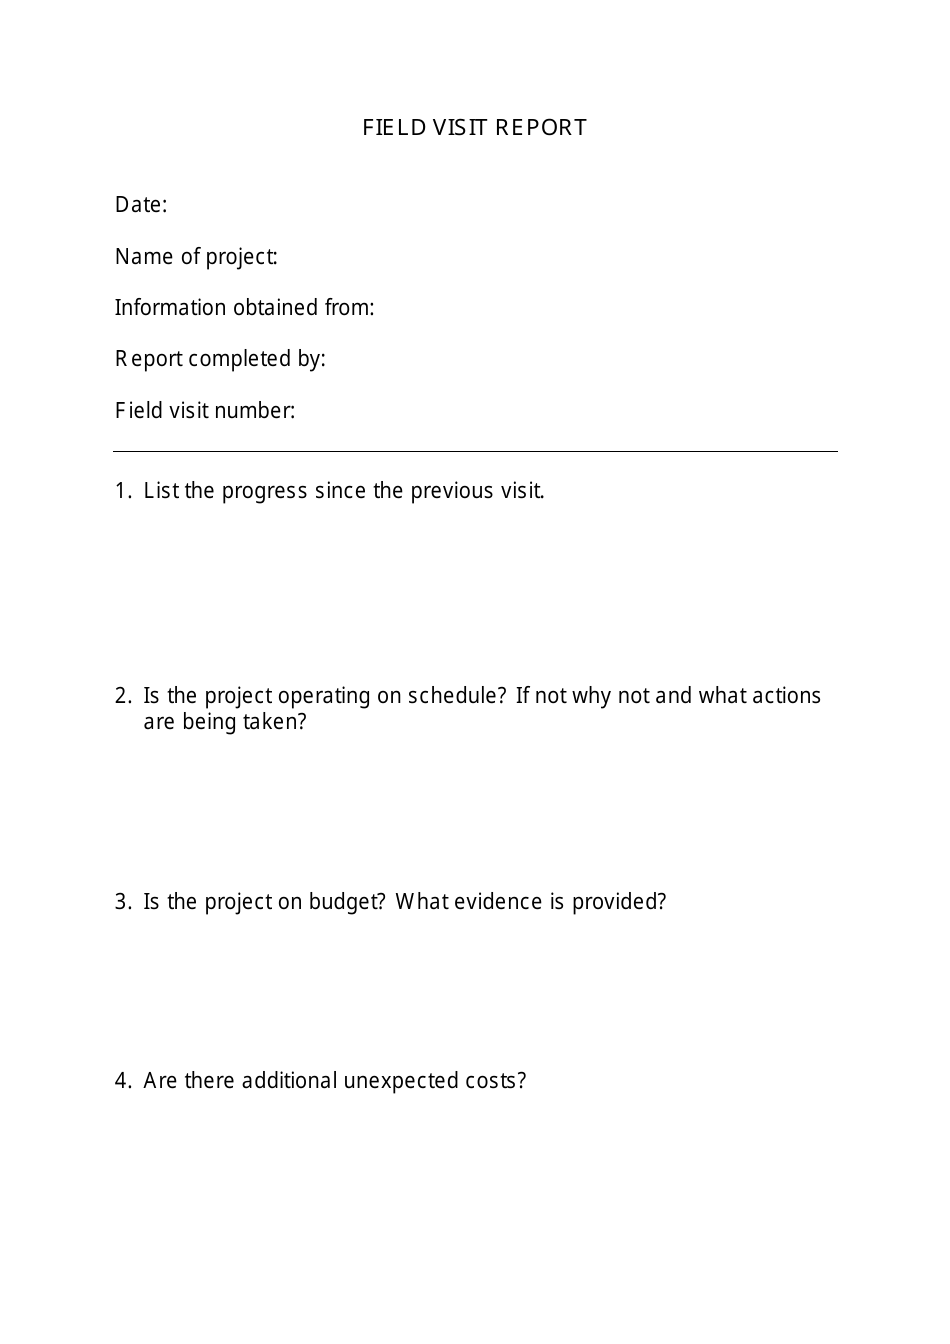 Field Visit Report Template, Page 1